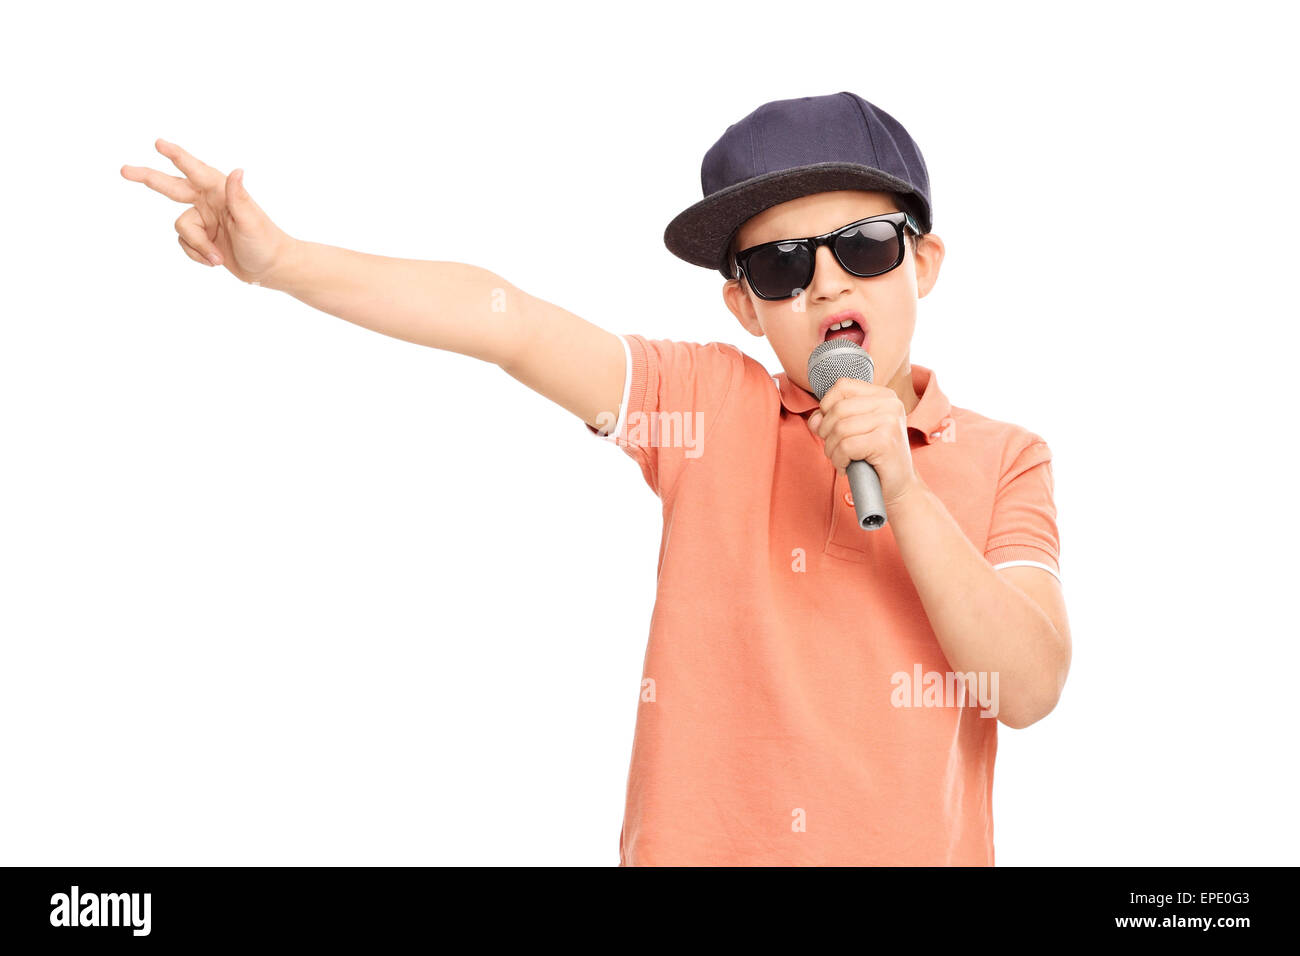 Little boy in hip hop outfit rapping on a microphone and gesturing with his hand isolated on white background Stock Photo